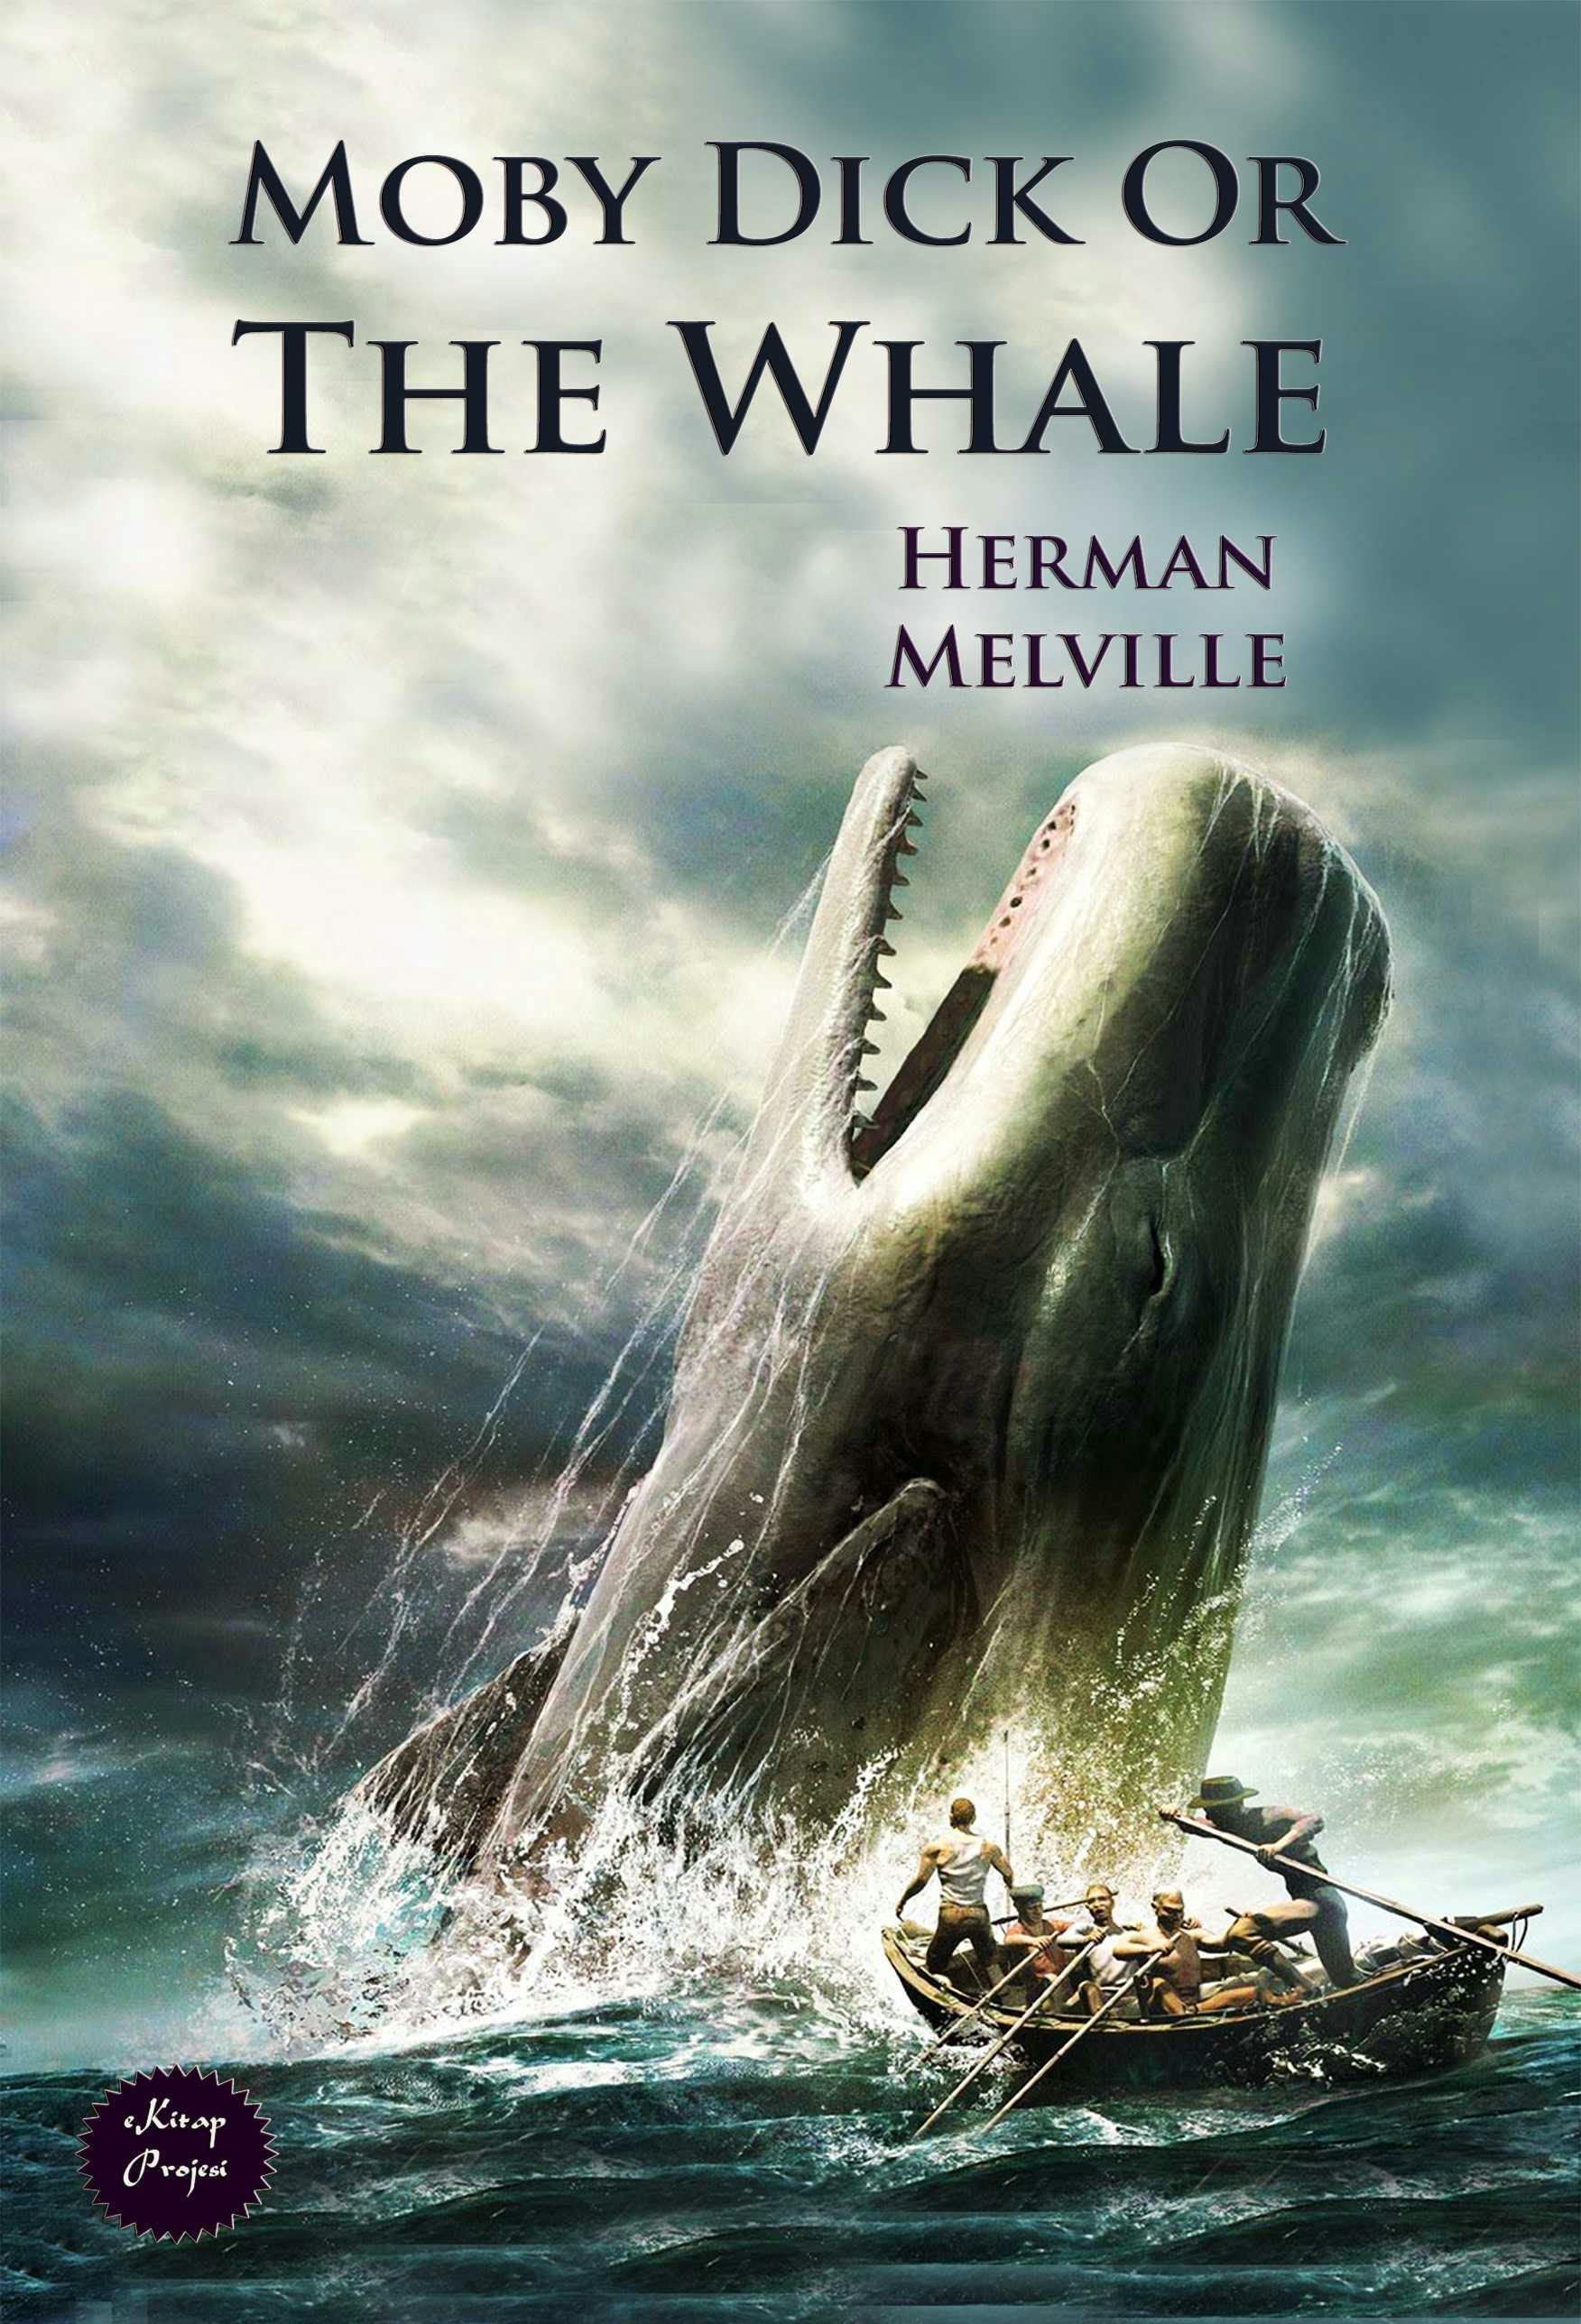 Moby Dick Or The Whale - Herman Melville